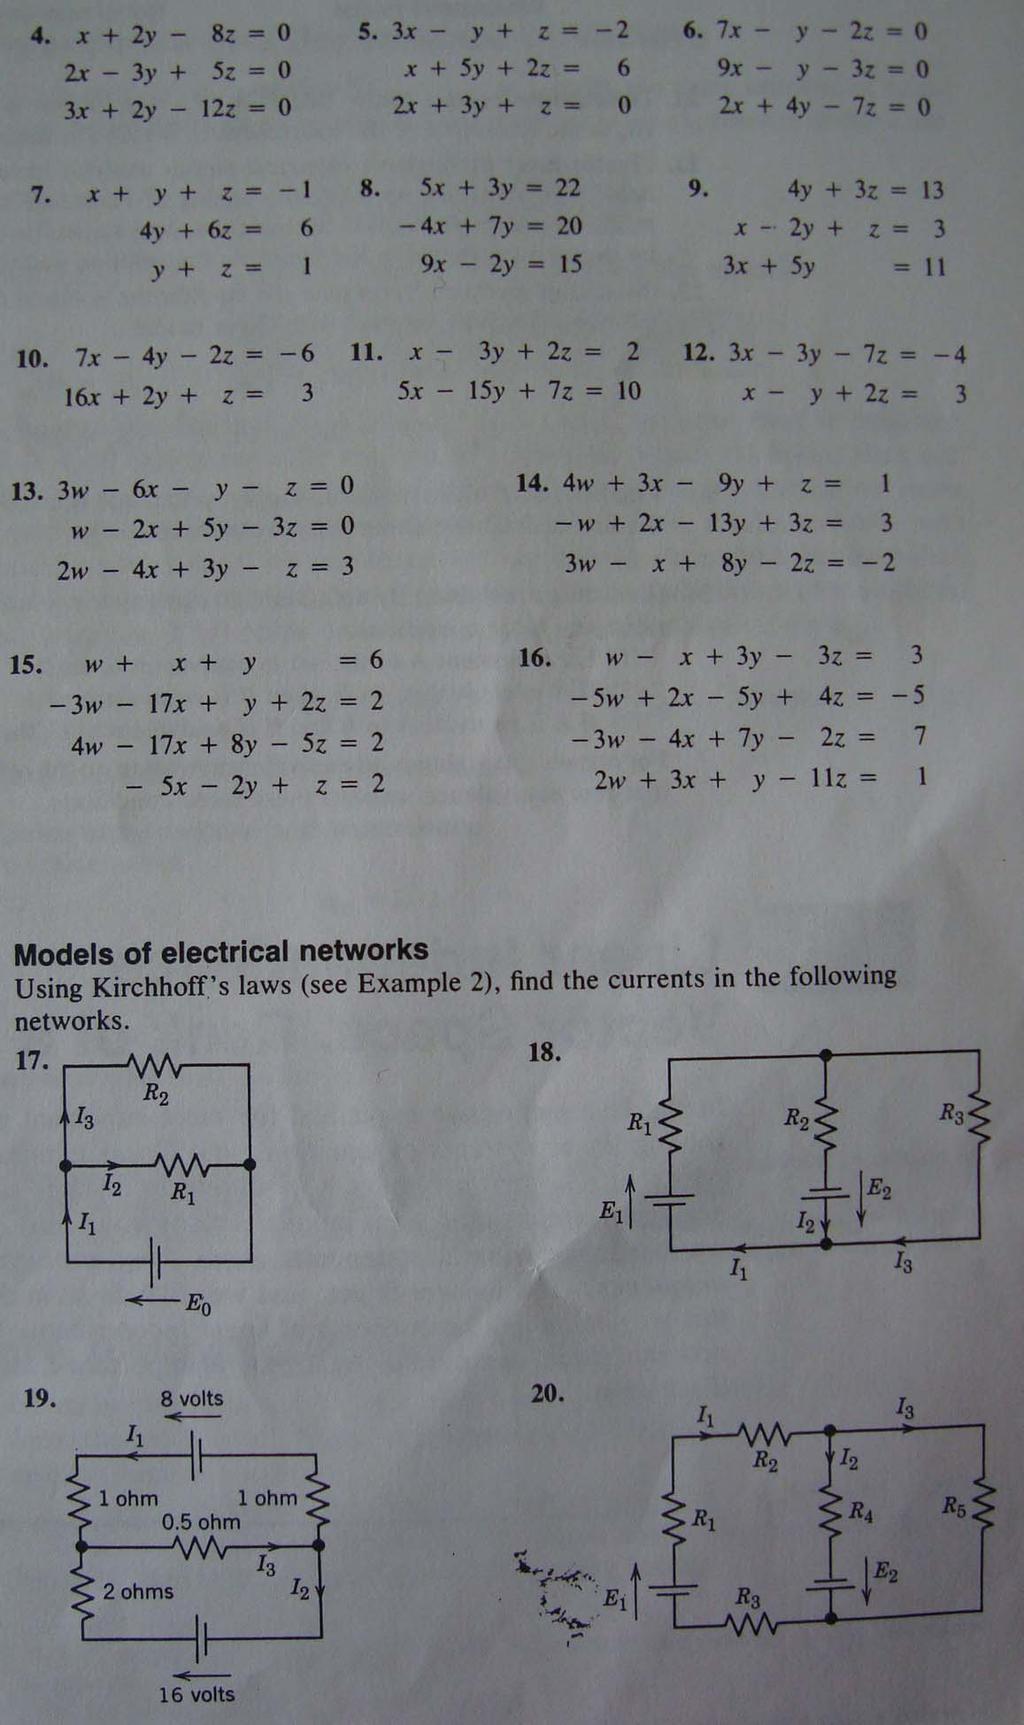 Exercise Sheet 5 Solve the